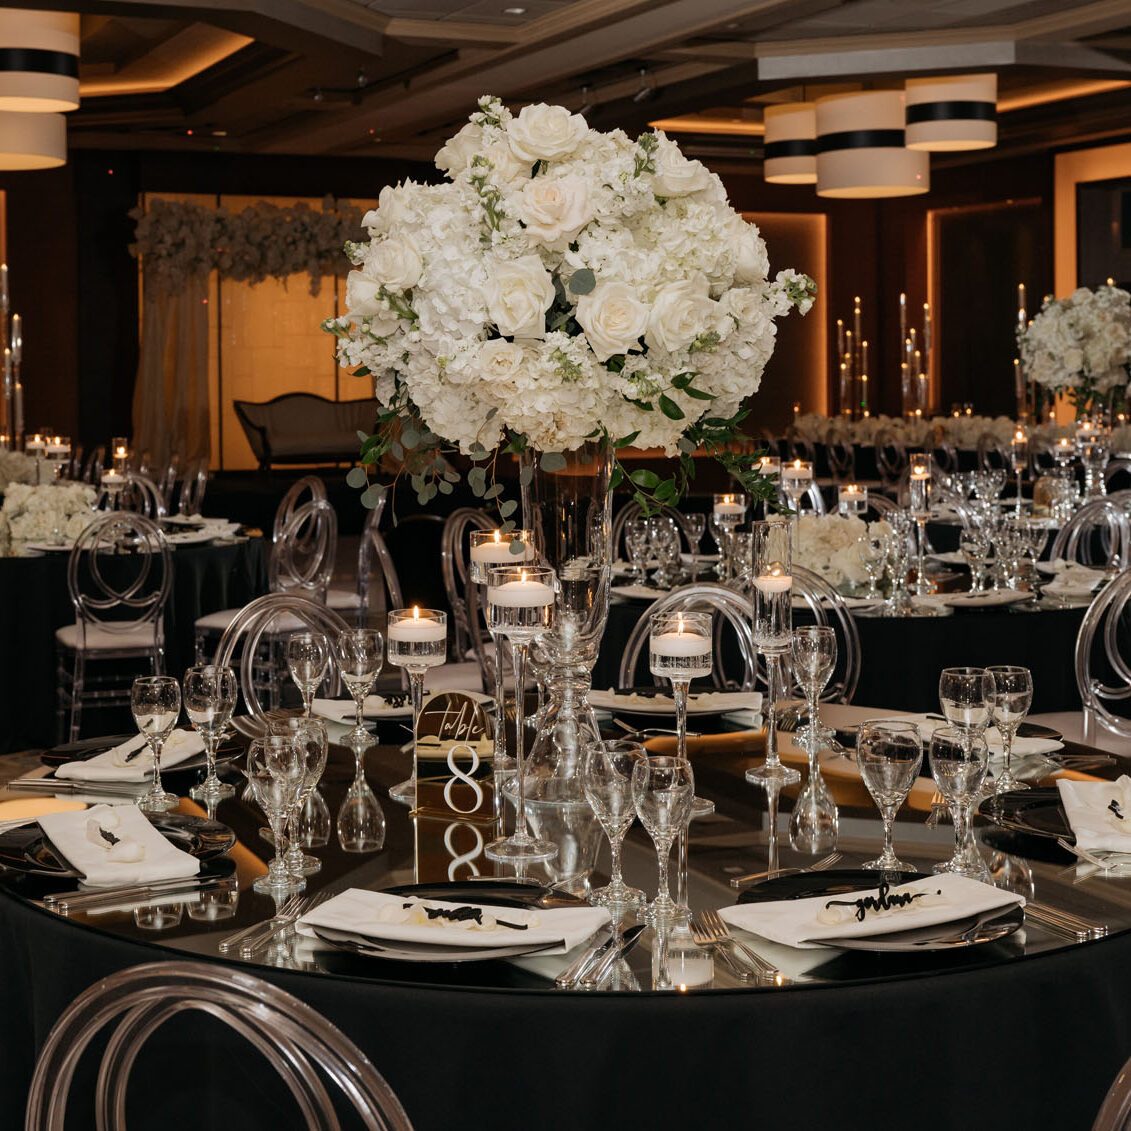 A variety of vibrant tall and low white centerpiece poofs designed by Flora Nova decorate the black tables of the ballroom.